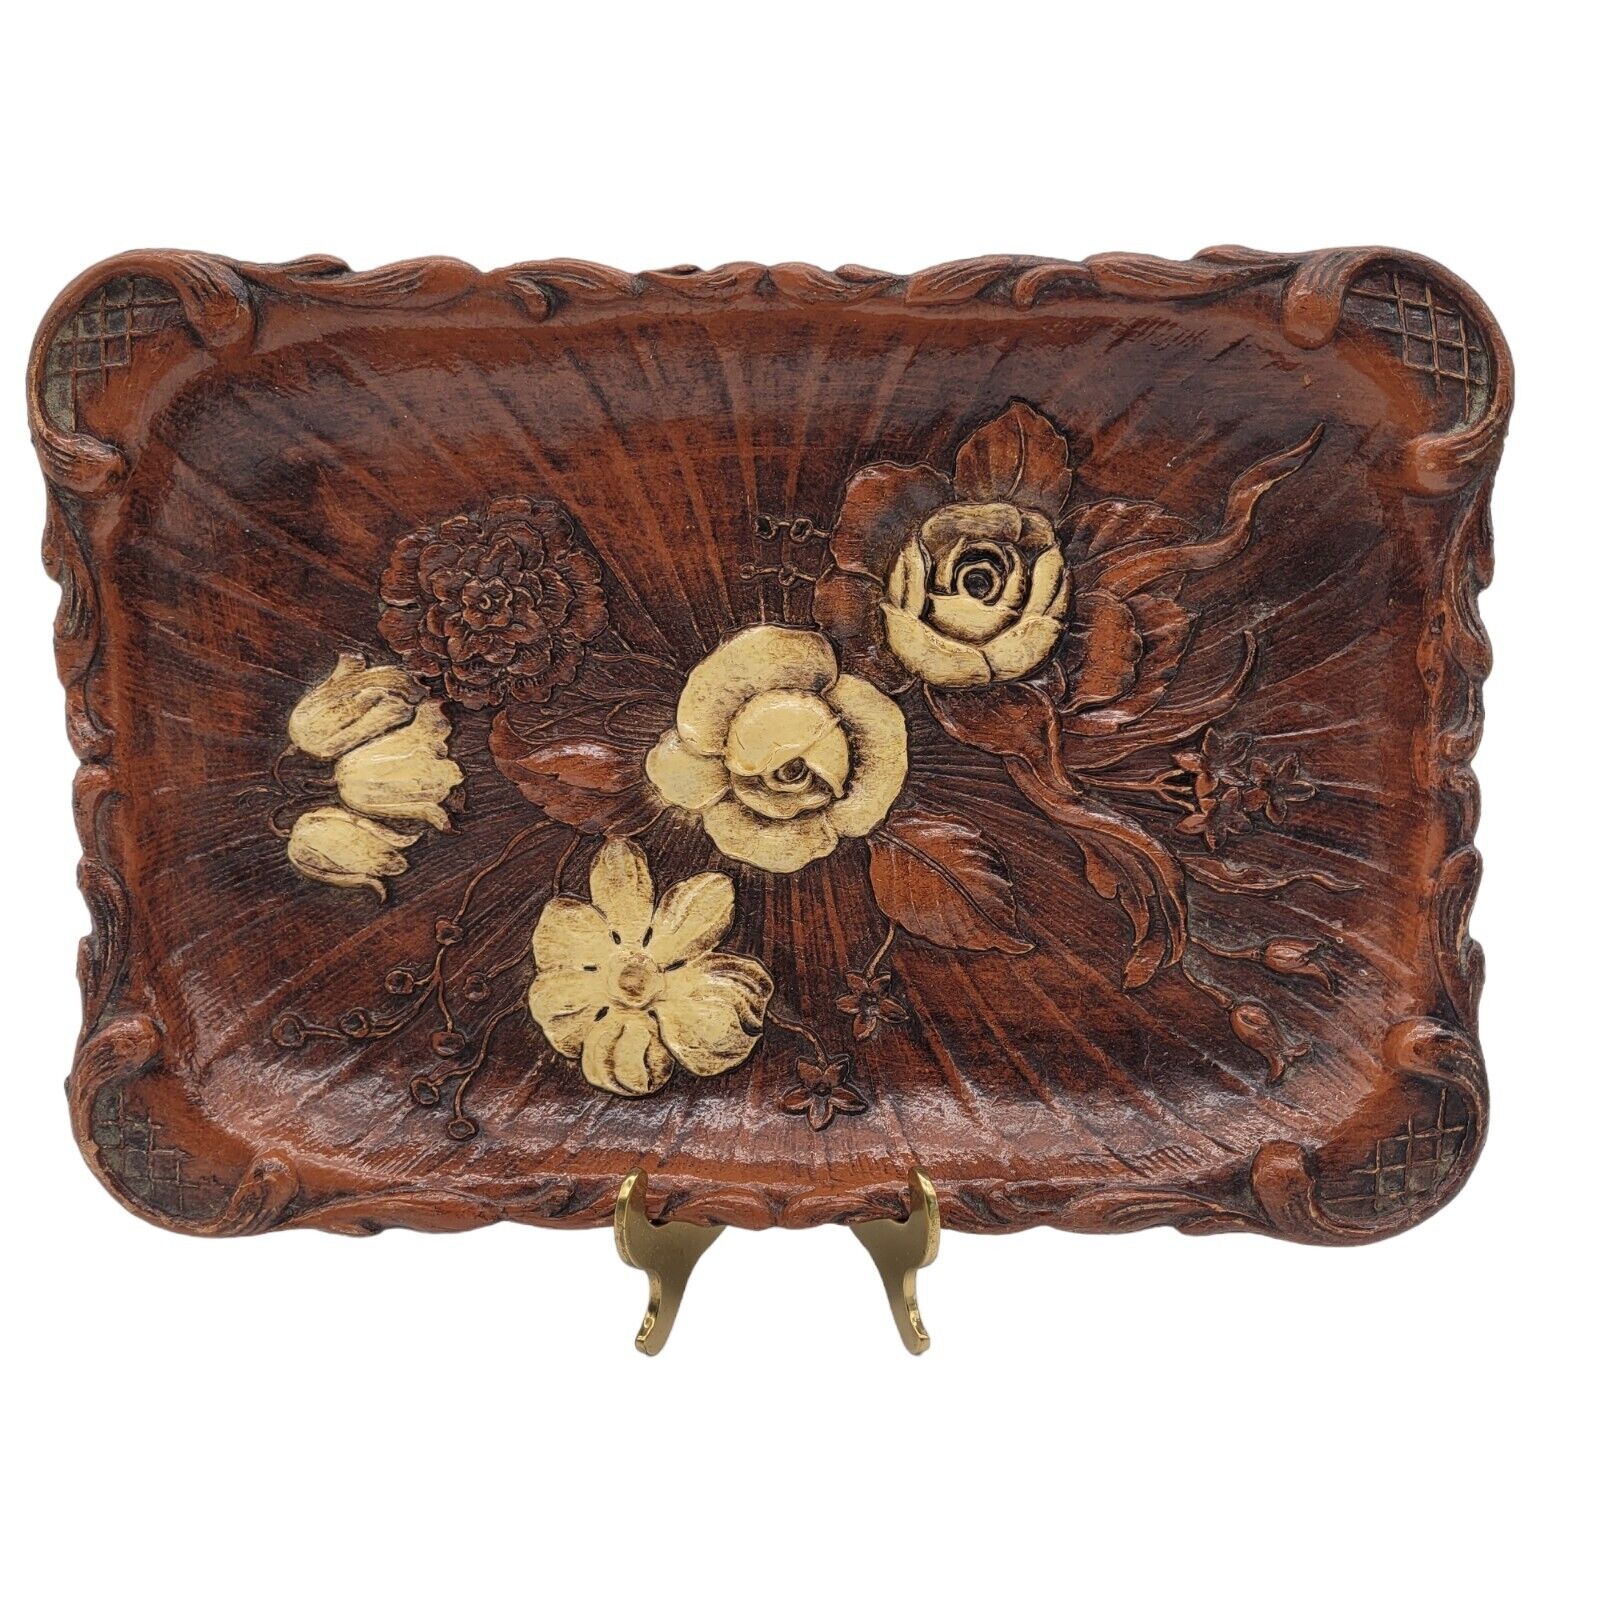 Vintage 1944 Multi Products Inc Wood Tray with Carved Flowers